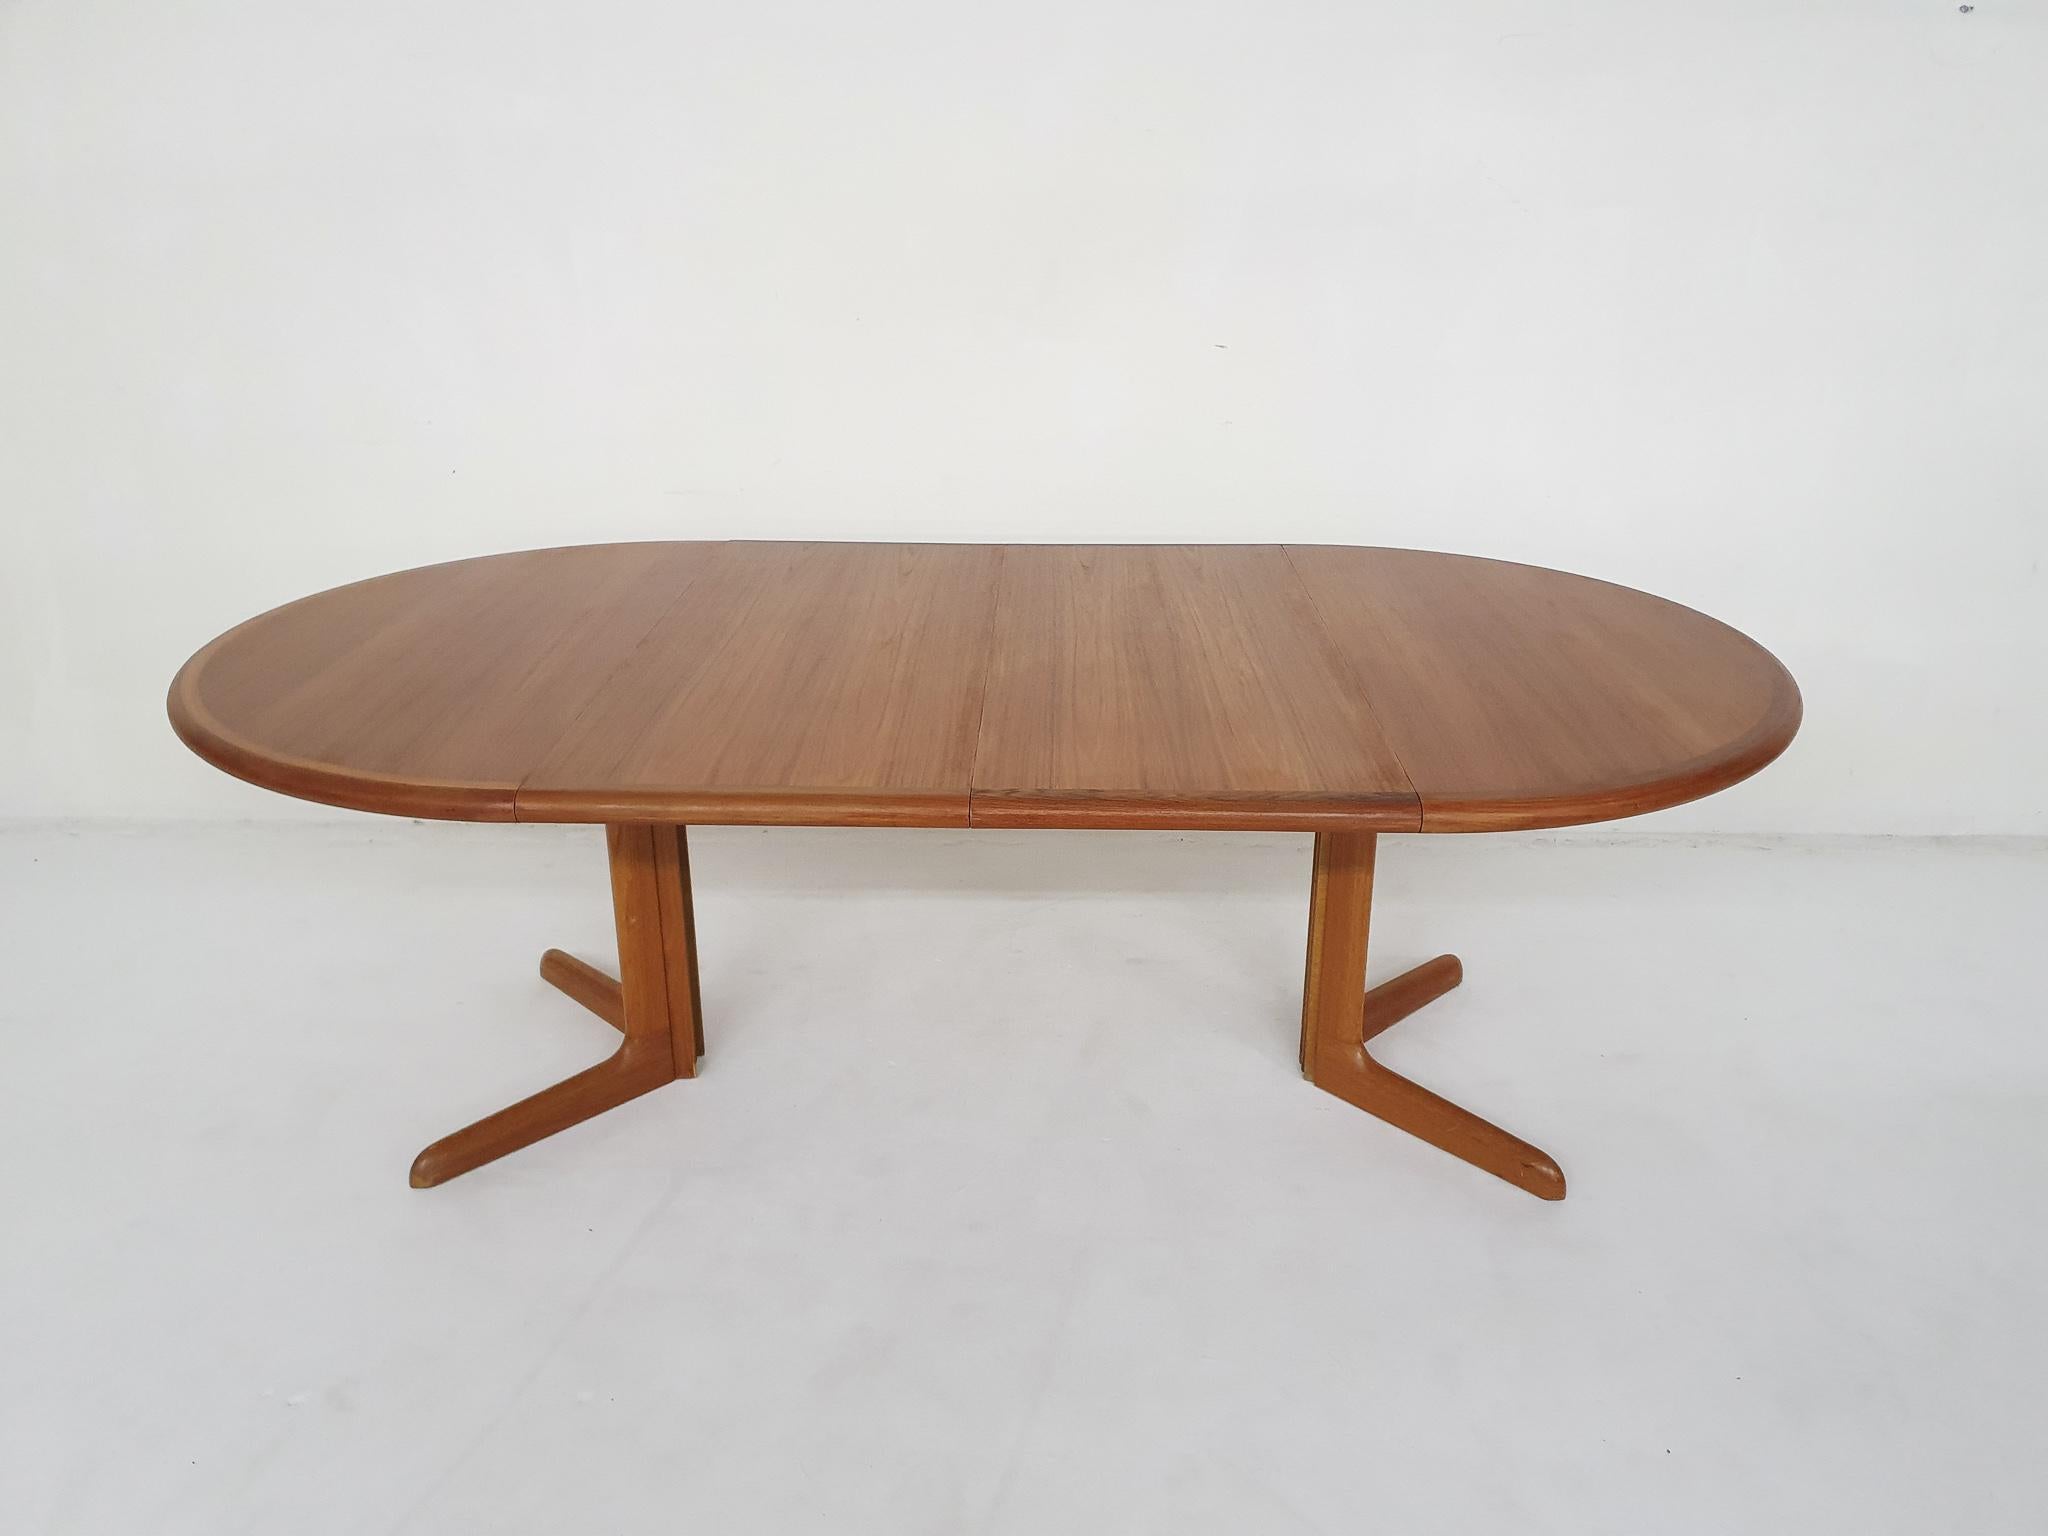 Round teak dining table with 2 extension leaves which gives space to seat up to 8 people. The extension leaves should be stored seperatly.
The top has been sand and laquered.
Measure: diameter 122, extended 220 cm

Niels Otto Møller was a Danish